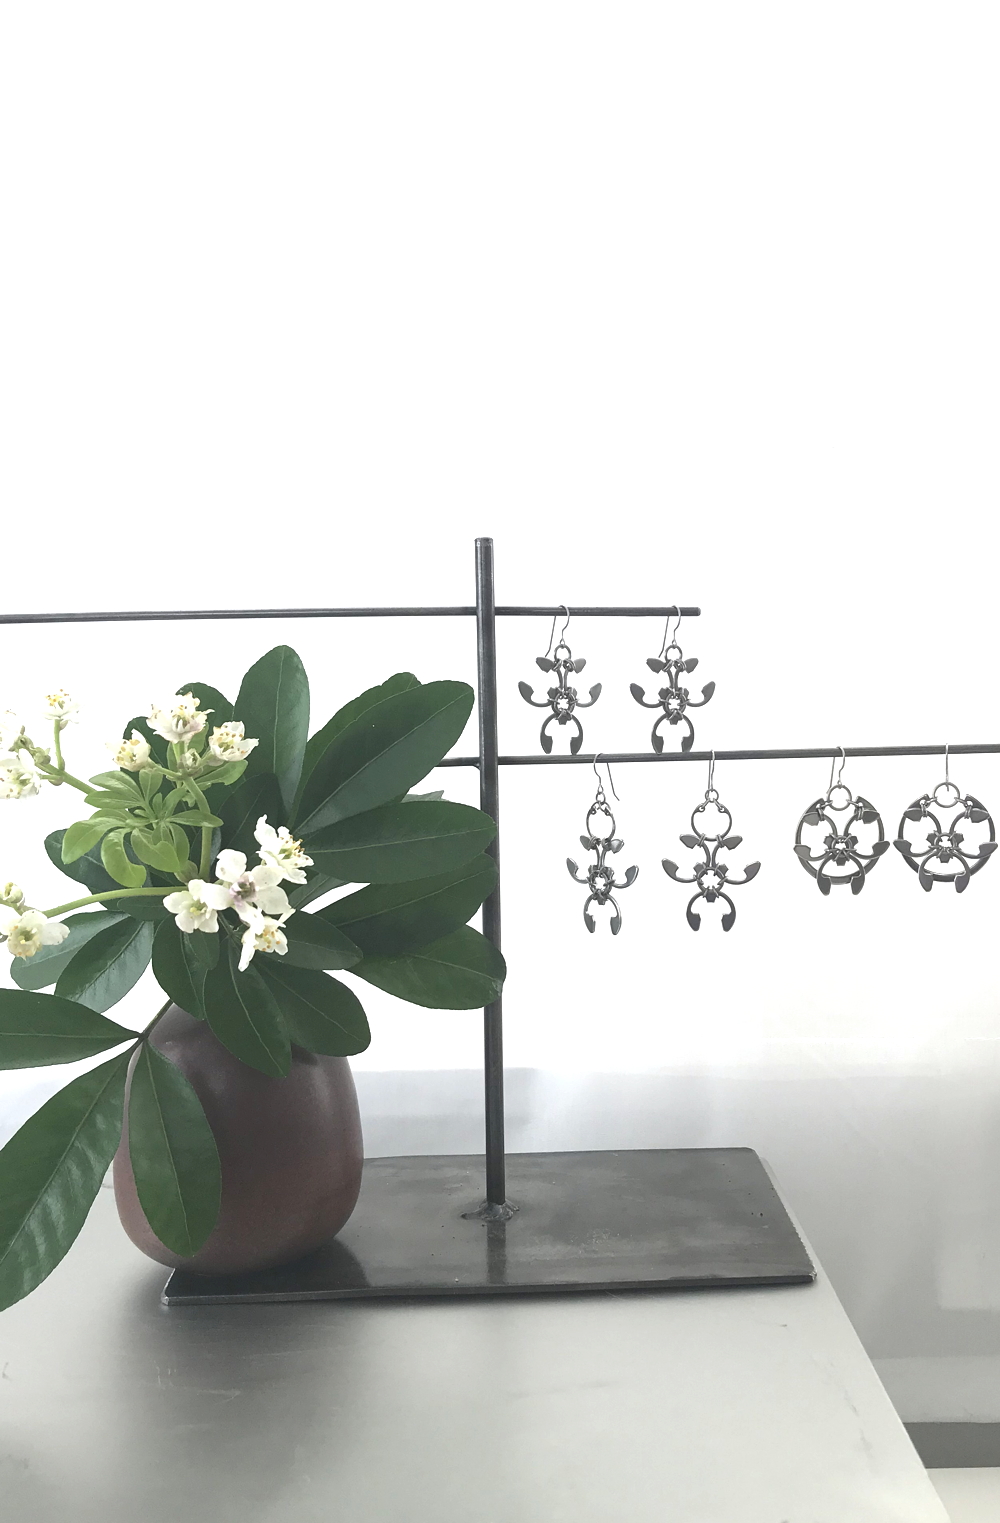 Studio vignette: a photo of a brown Heath Ceramics modern bud vase with choisya green leaves and white flowers, next to a welded steel jewelry stand with Wraptillion's spiky edgy Trellis Earrings, Garland Earrings, and Rose Window Earrings nearby, in front of a white curtain.